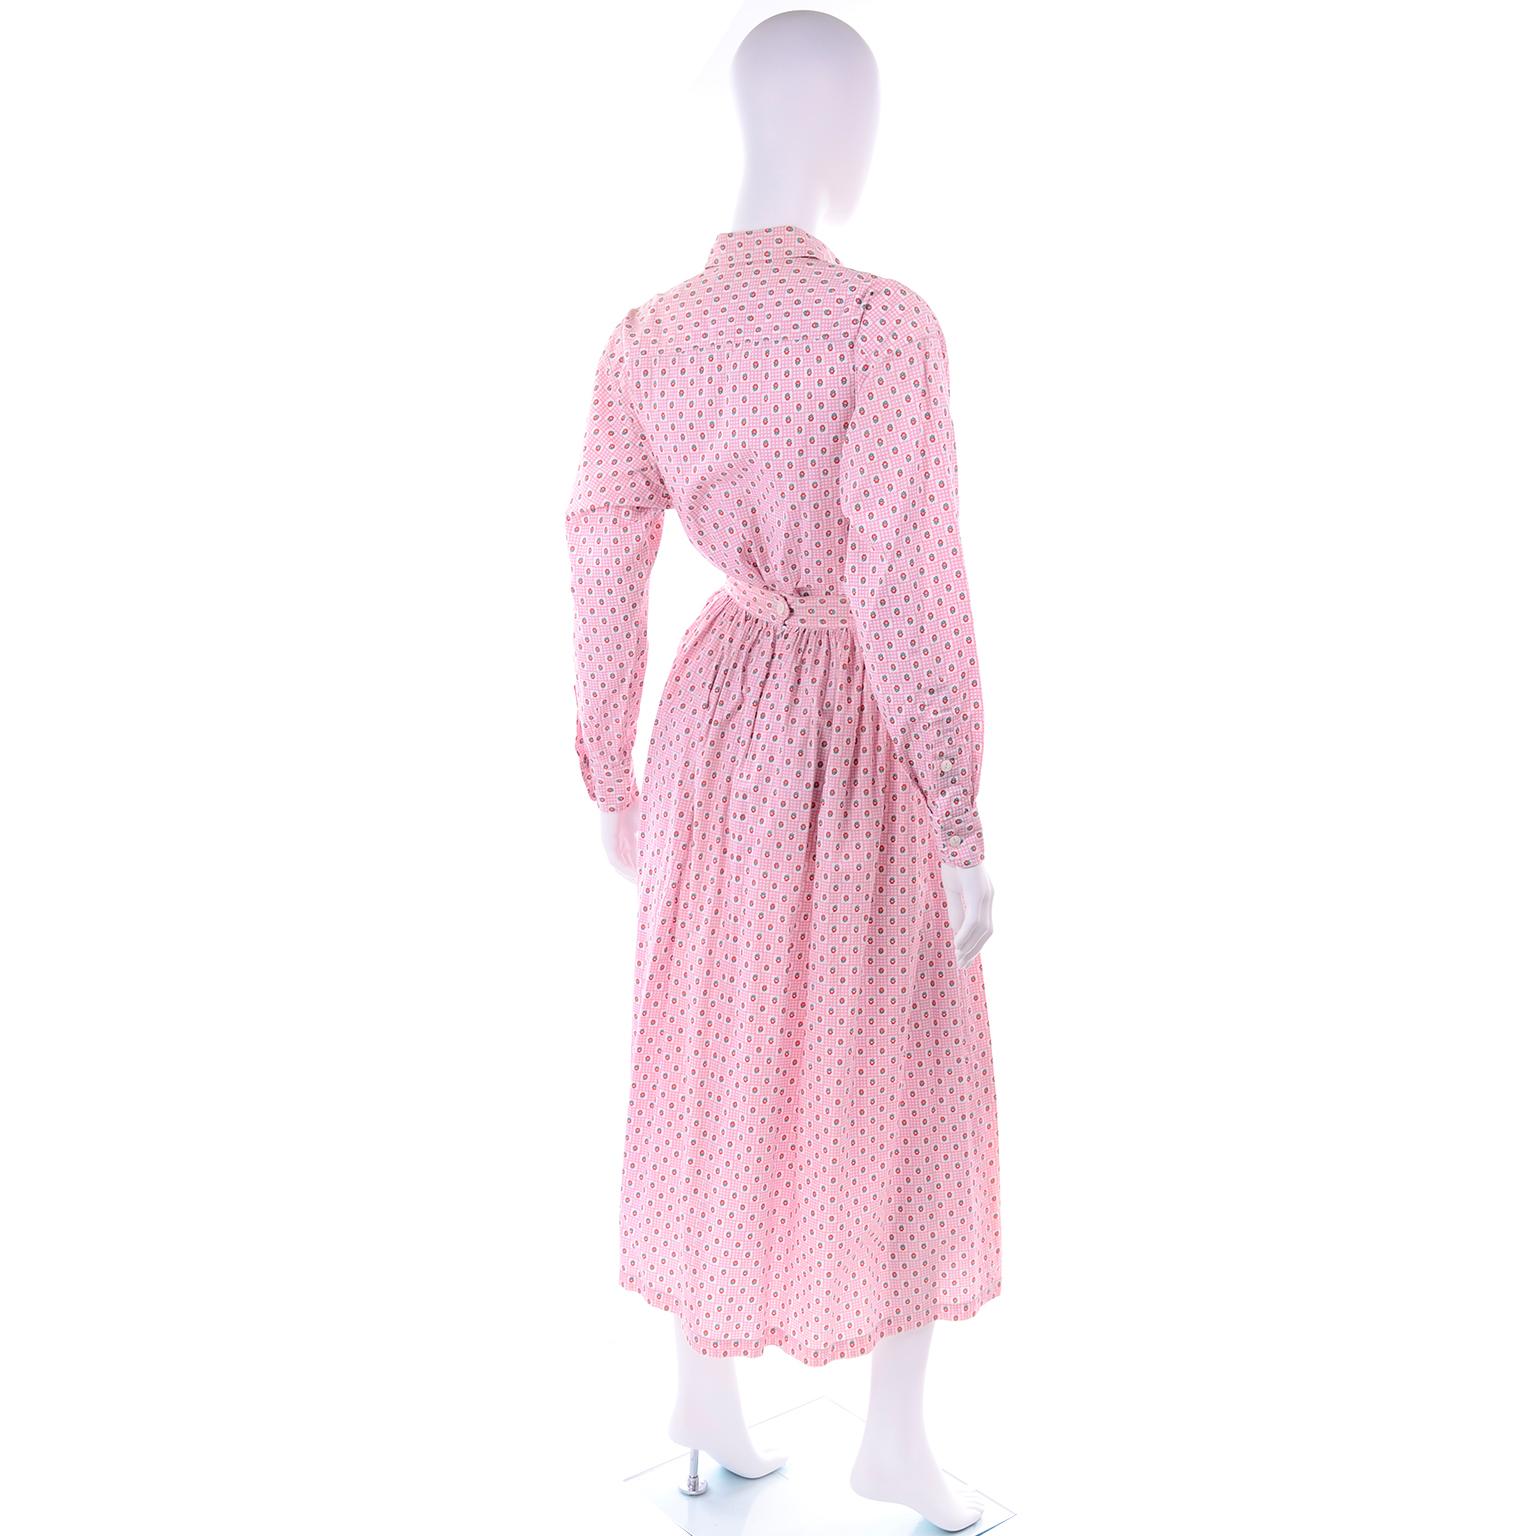 Deadstock New w Tags Vintage Ralph Lauren Pink Floral 2 pc Dress Skirt & Blouse In New Condition For Sale In Portland, OR